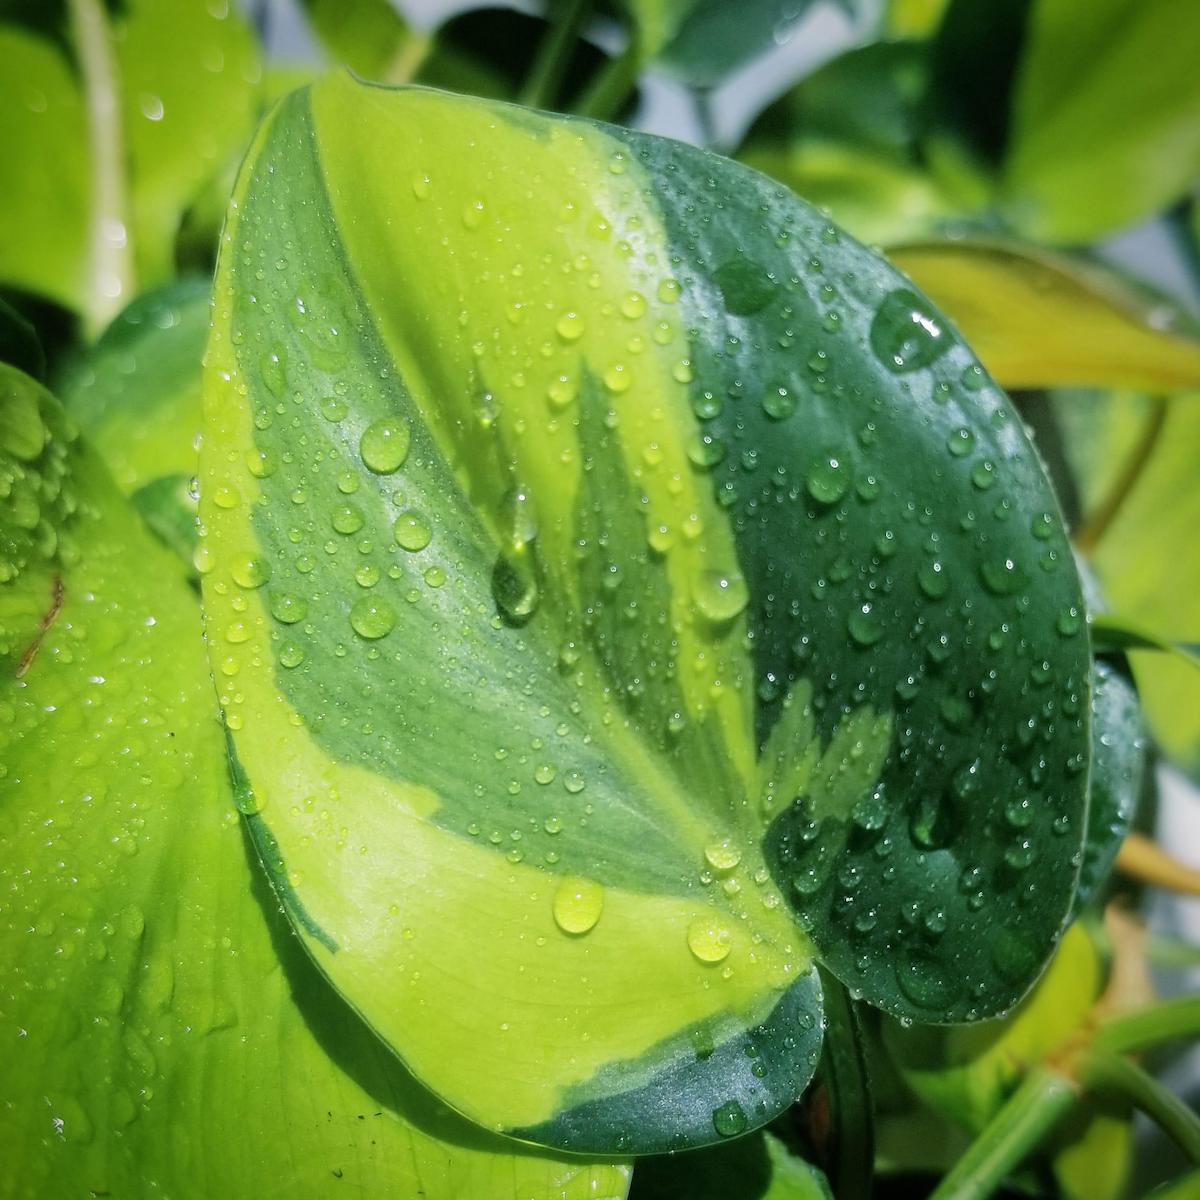 philodendron brasil care: how to keep them happy